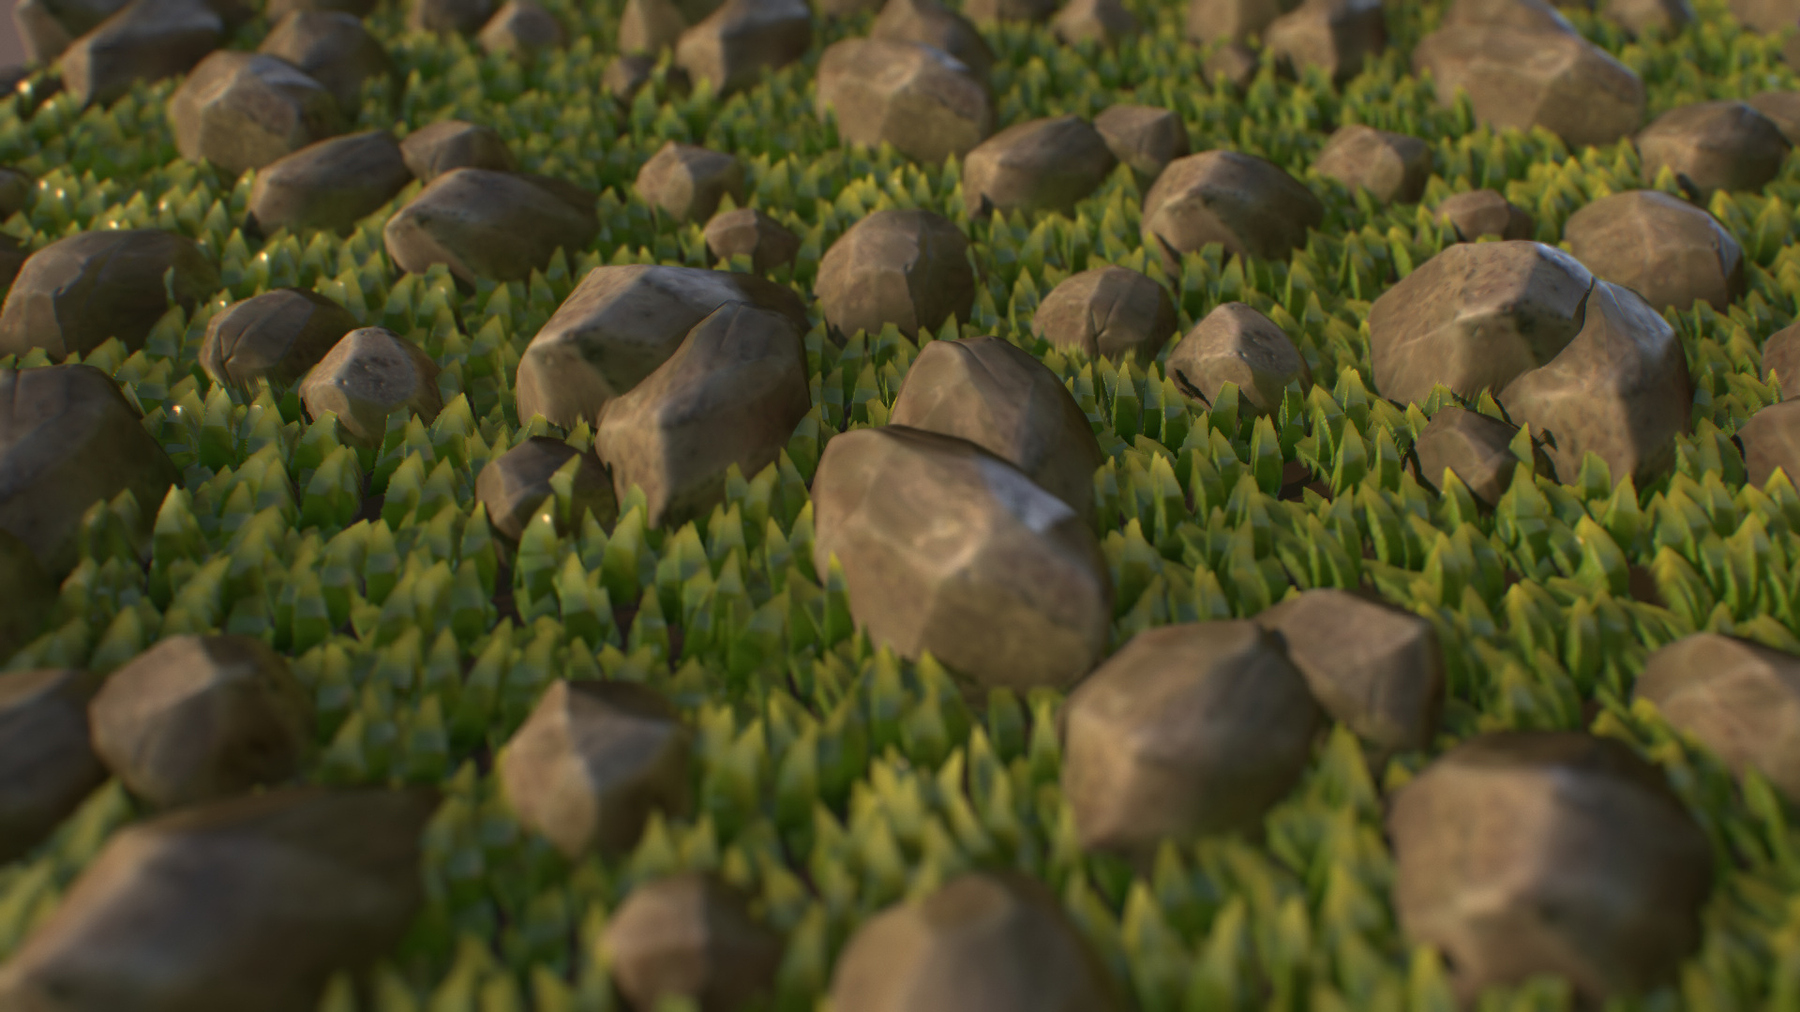 creating tileable textures in zbrush